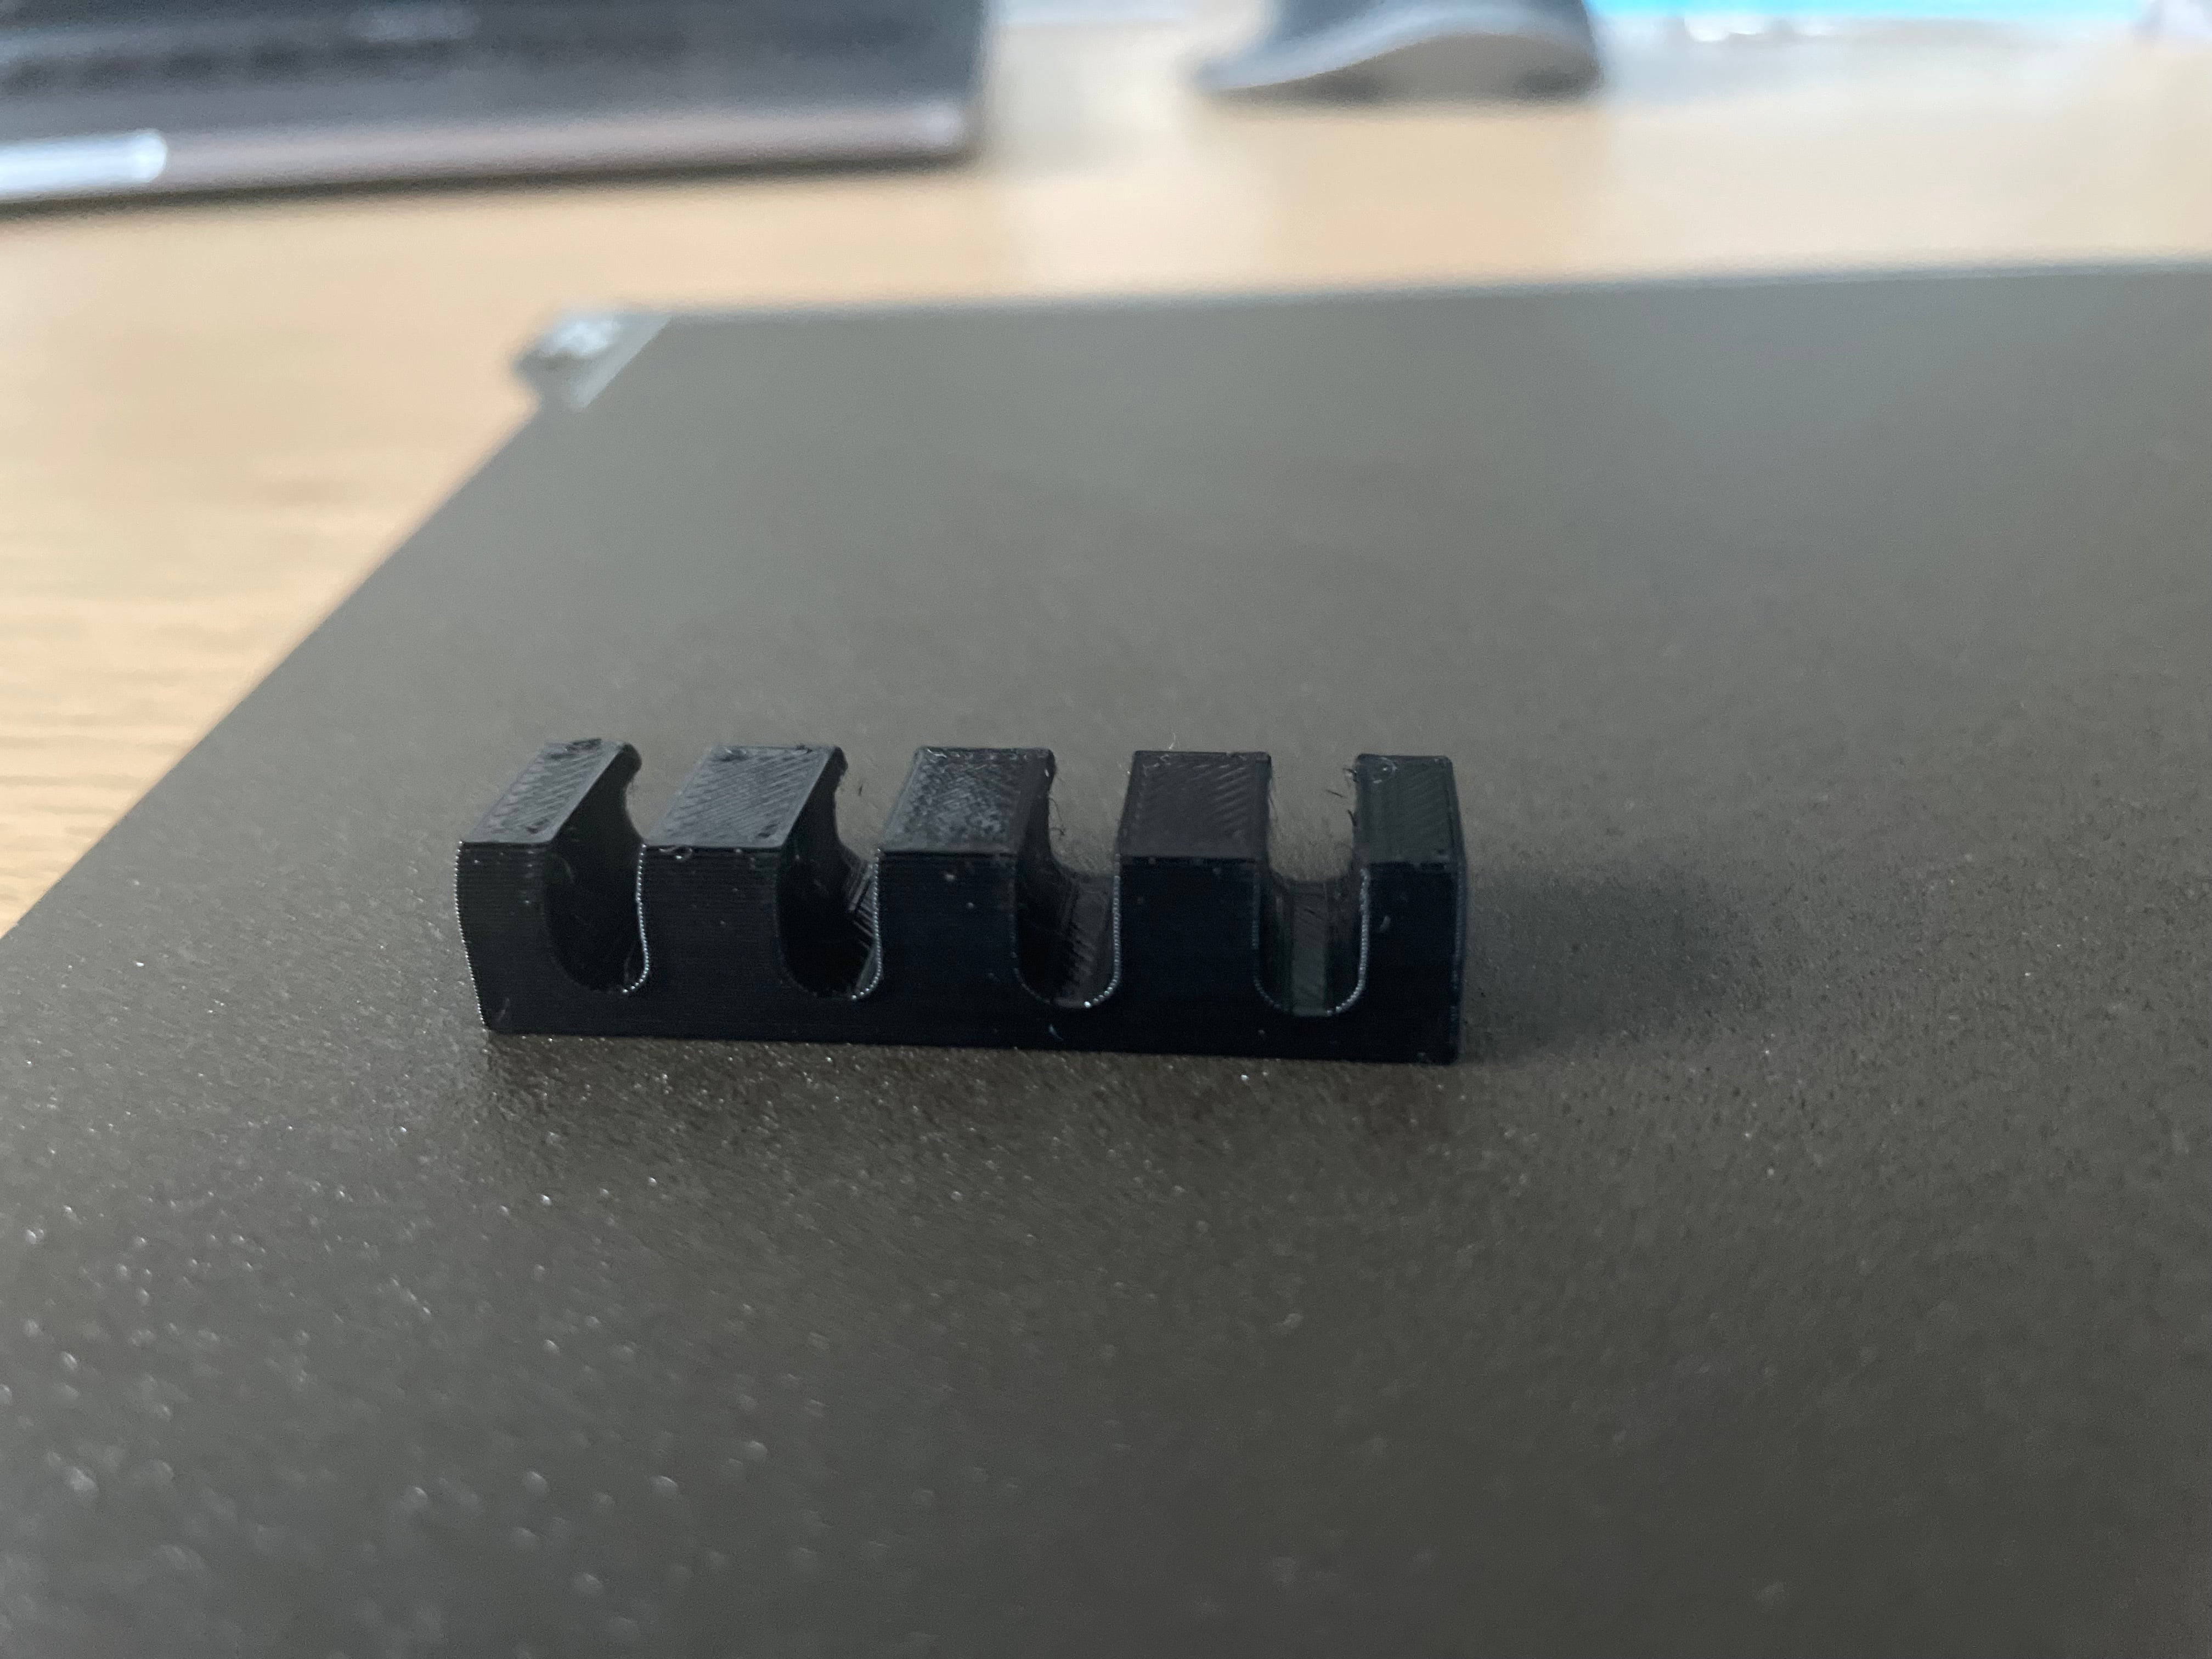 Cable holder for cable management